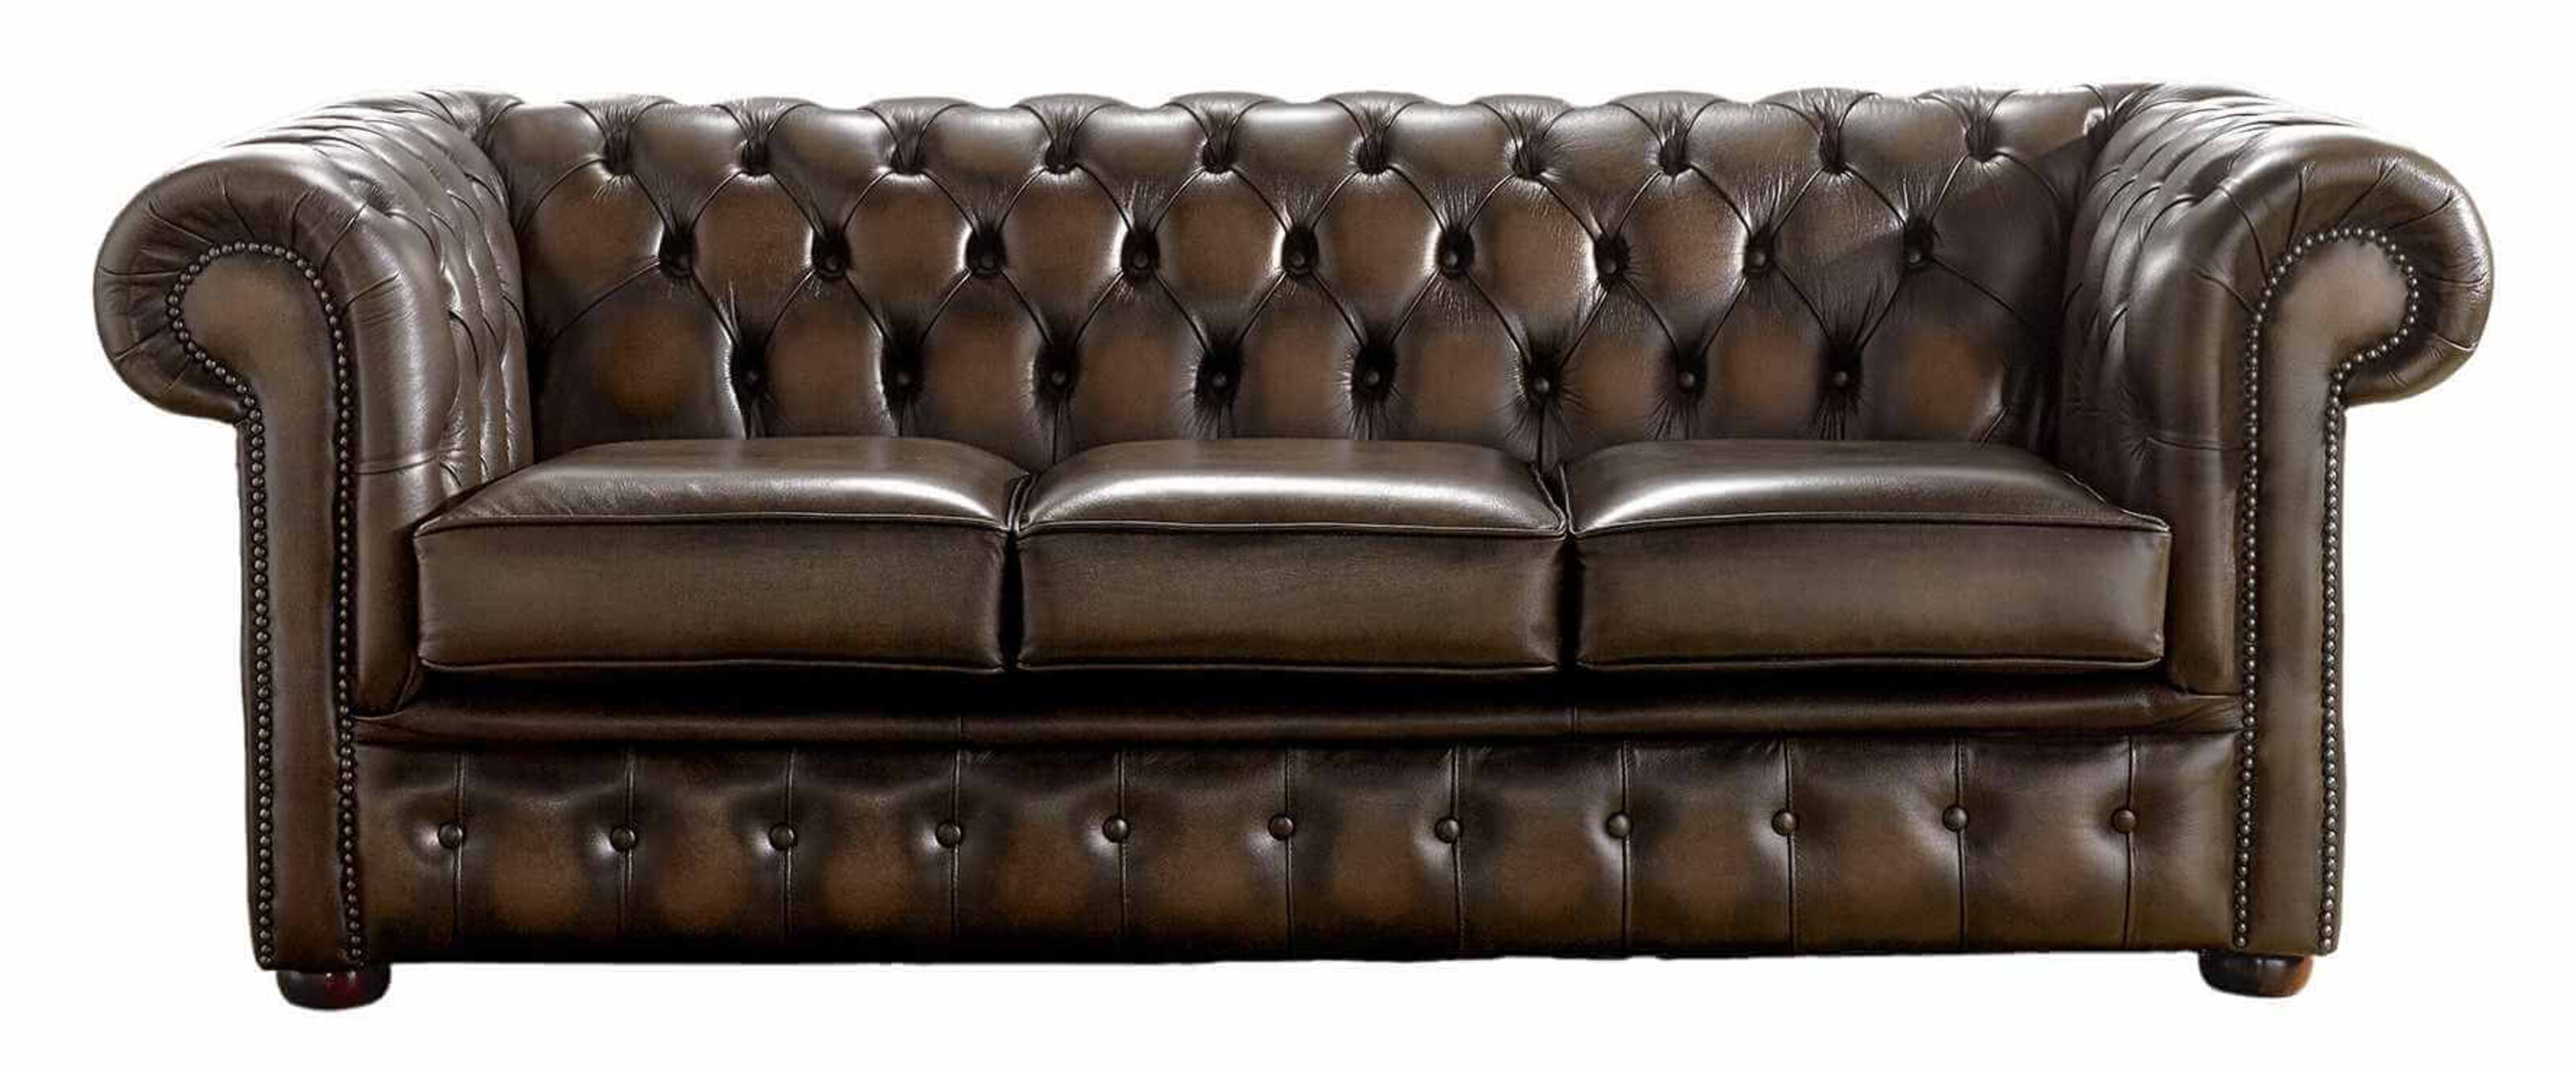 Clearance Comfort: Explore Chesterfield Sofa Bargains  %Post Title